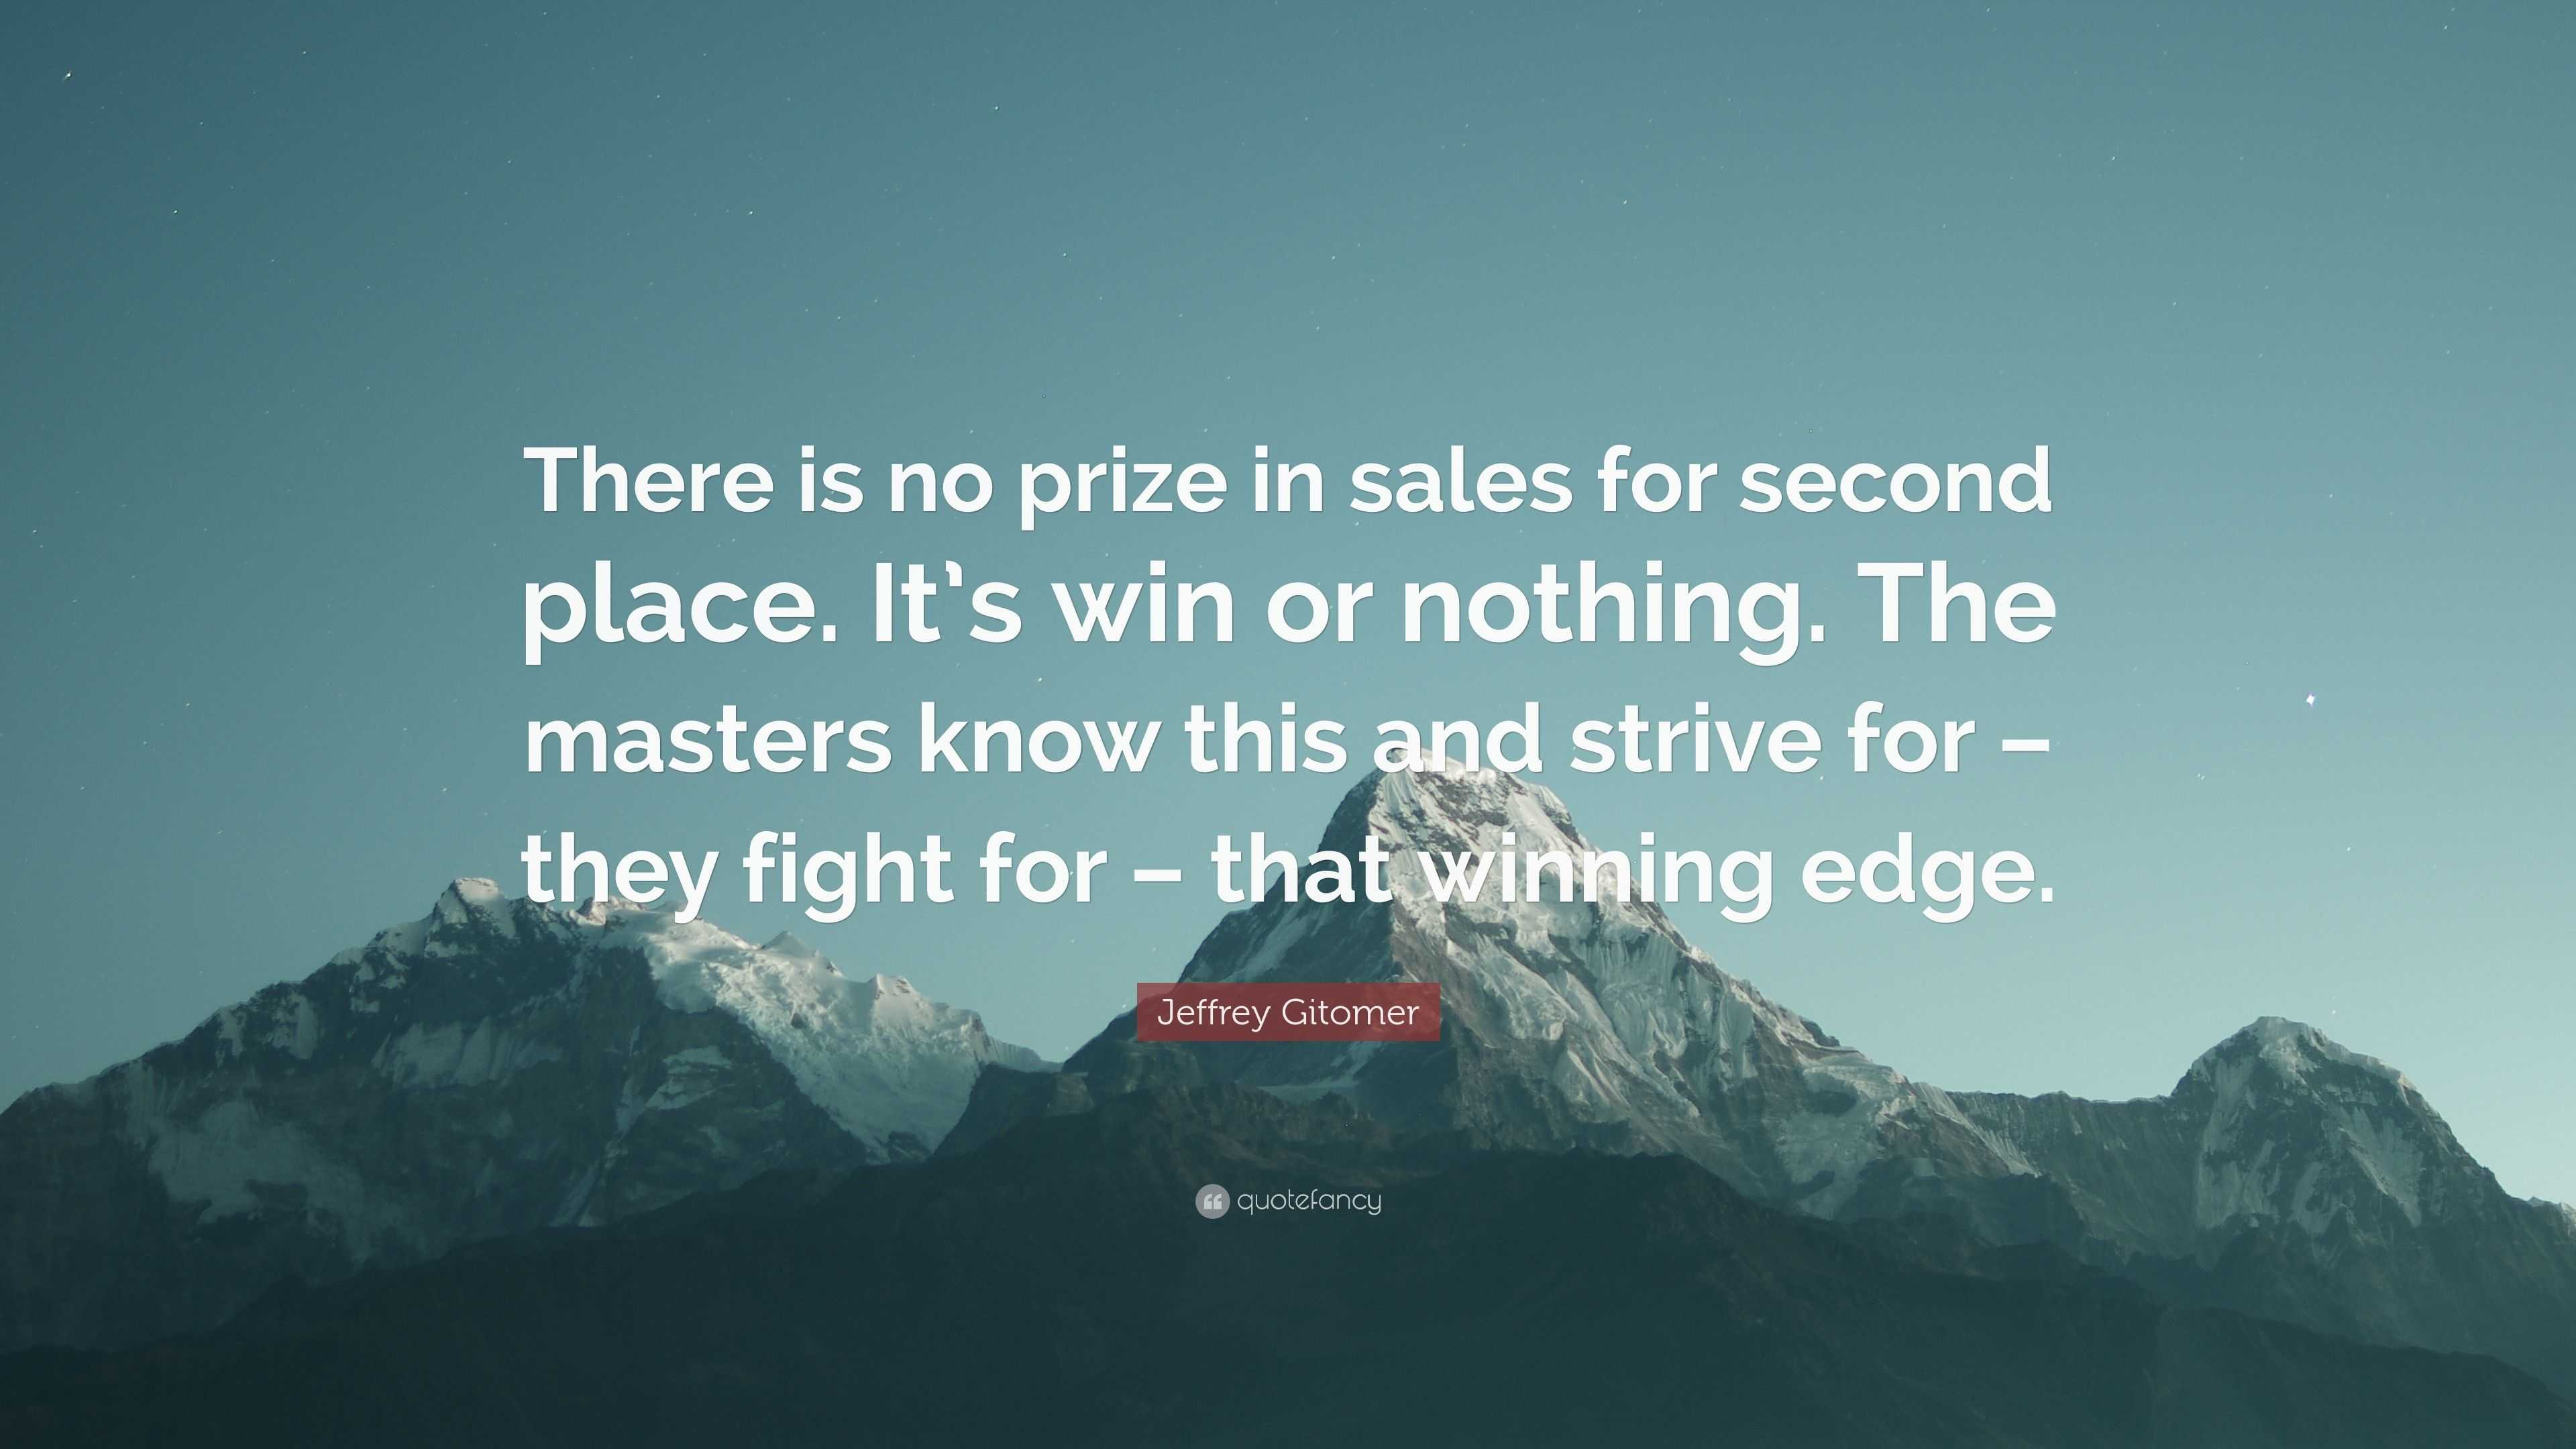 Jeffrey Gitomer Quote There Is No Prize In Sales For Second Place It S Win Or Nothing The Masters Know This And Strive For They Fight For